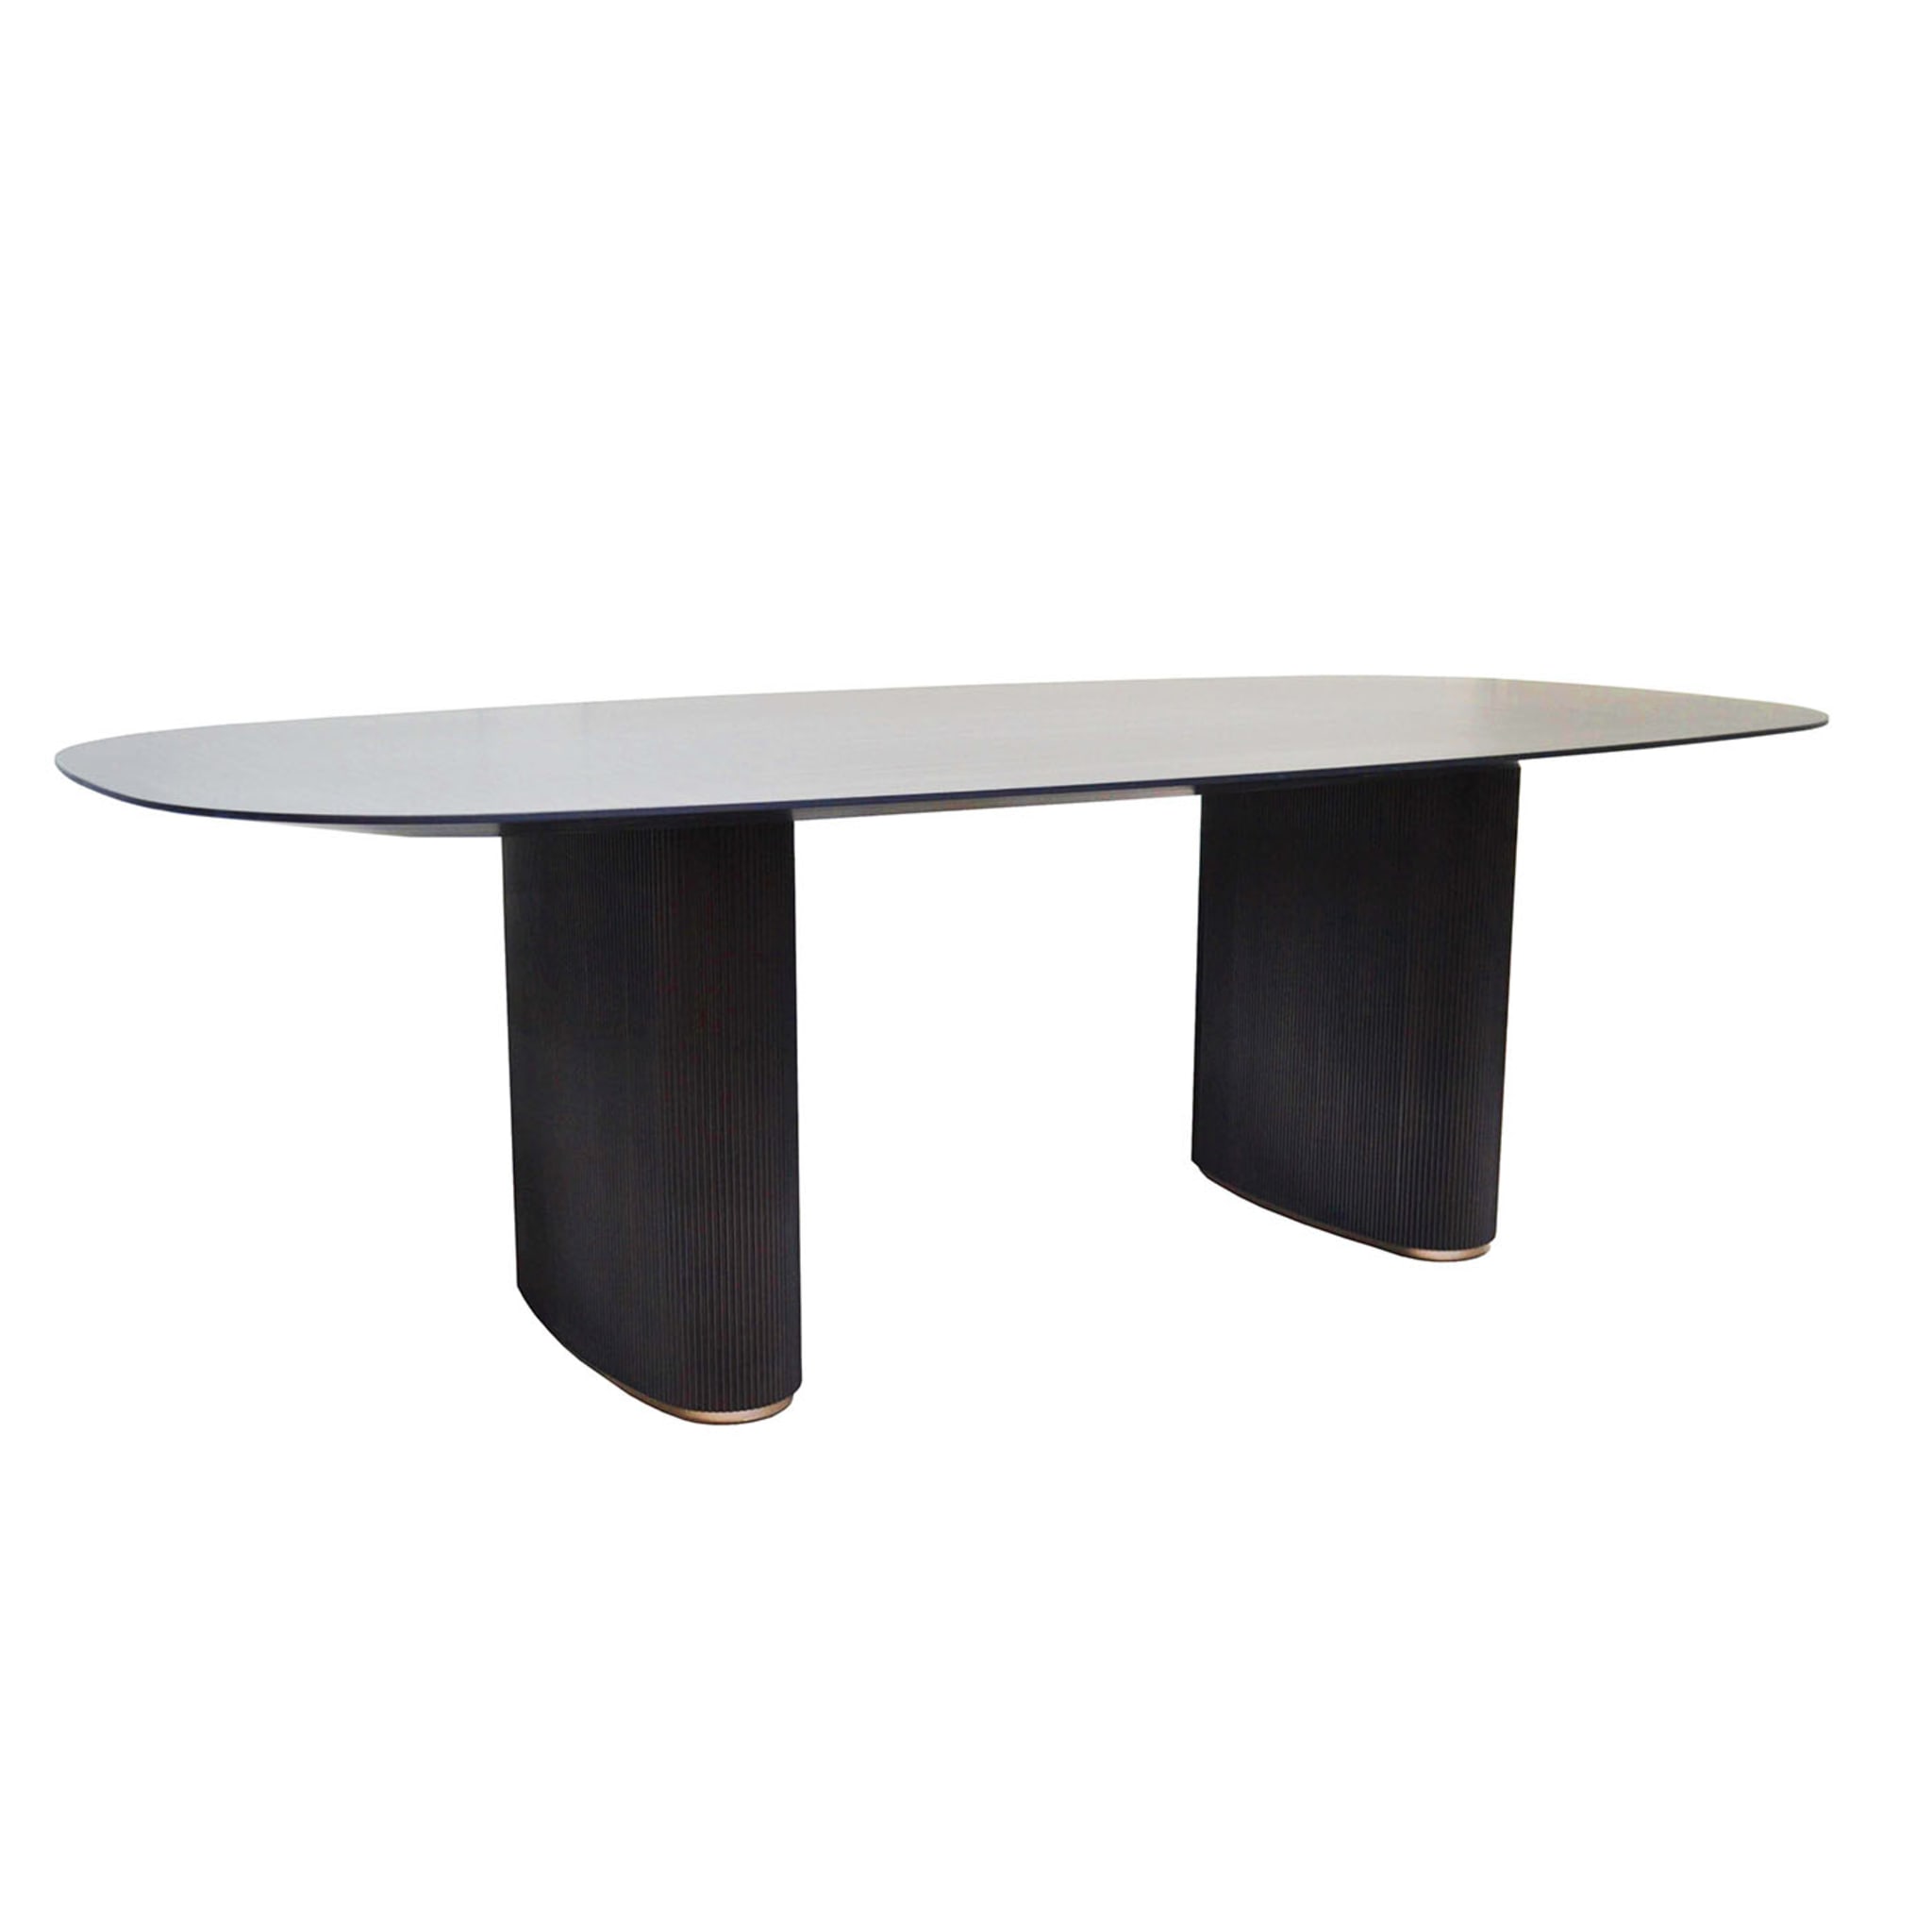 Italian Contemporary Oval Curved Dining Table  - Alternative view 1